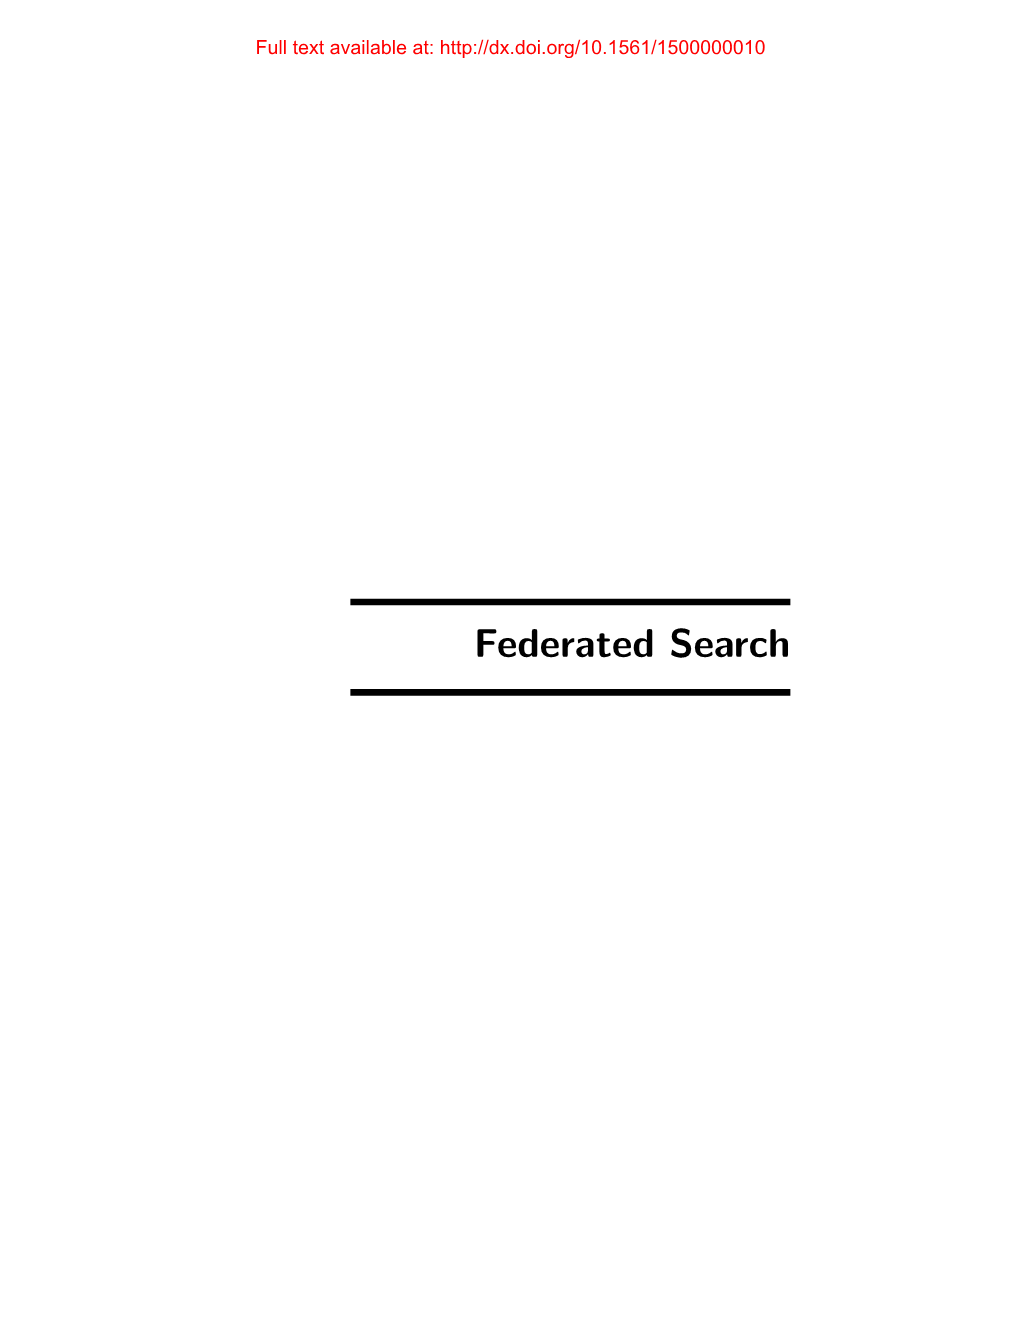 Federated Search Full Text Available At